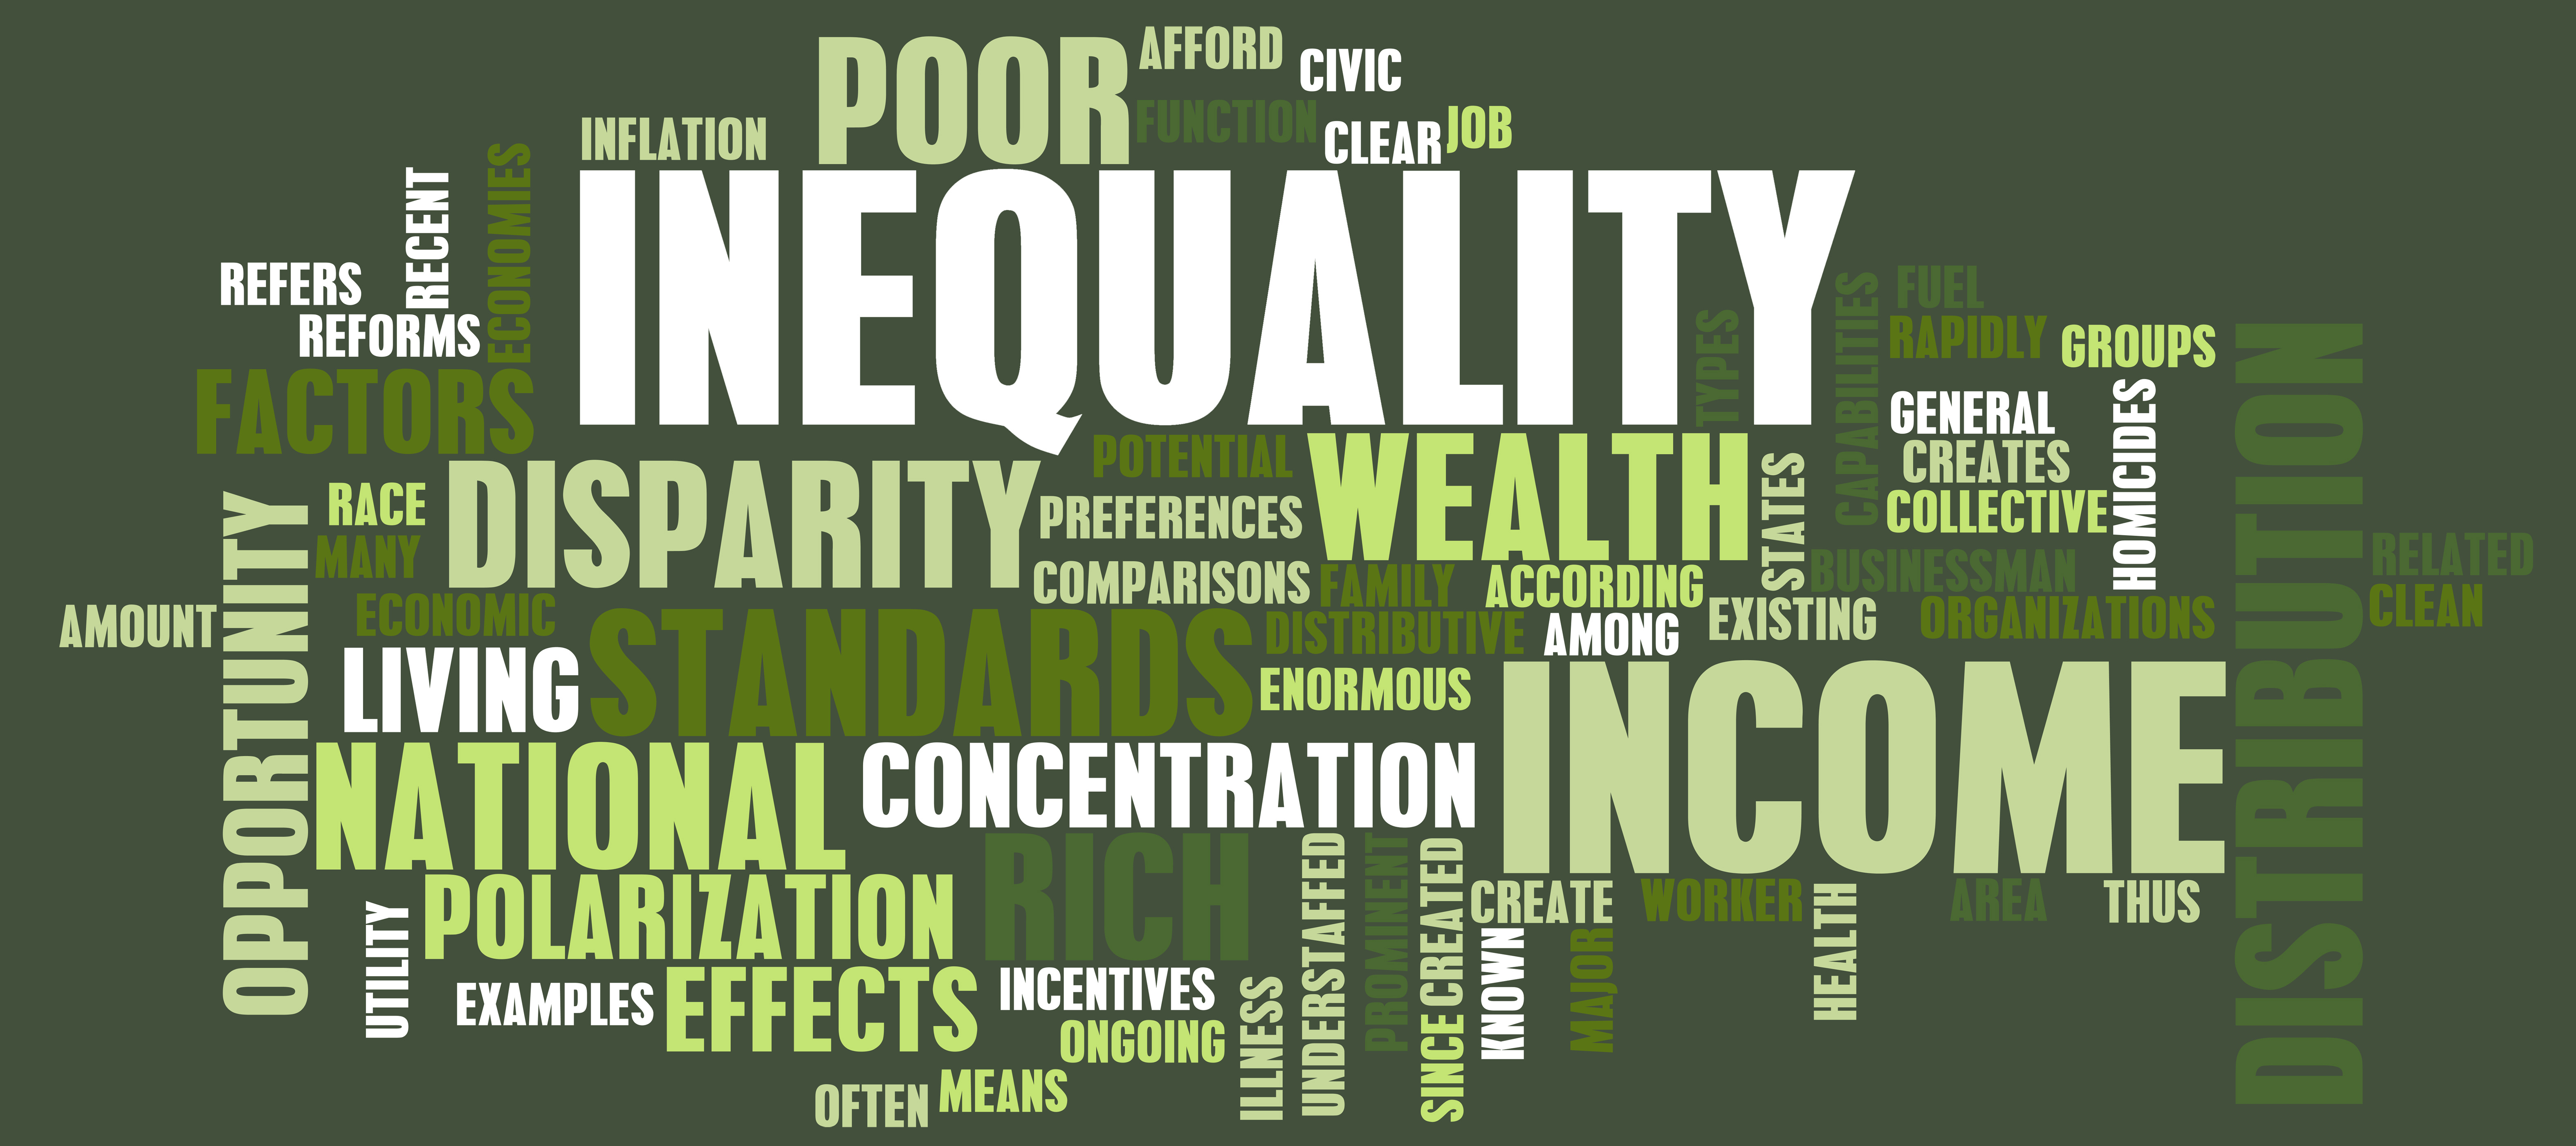 Income Inequality: How does the U.S. stack up globally?